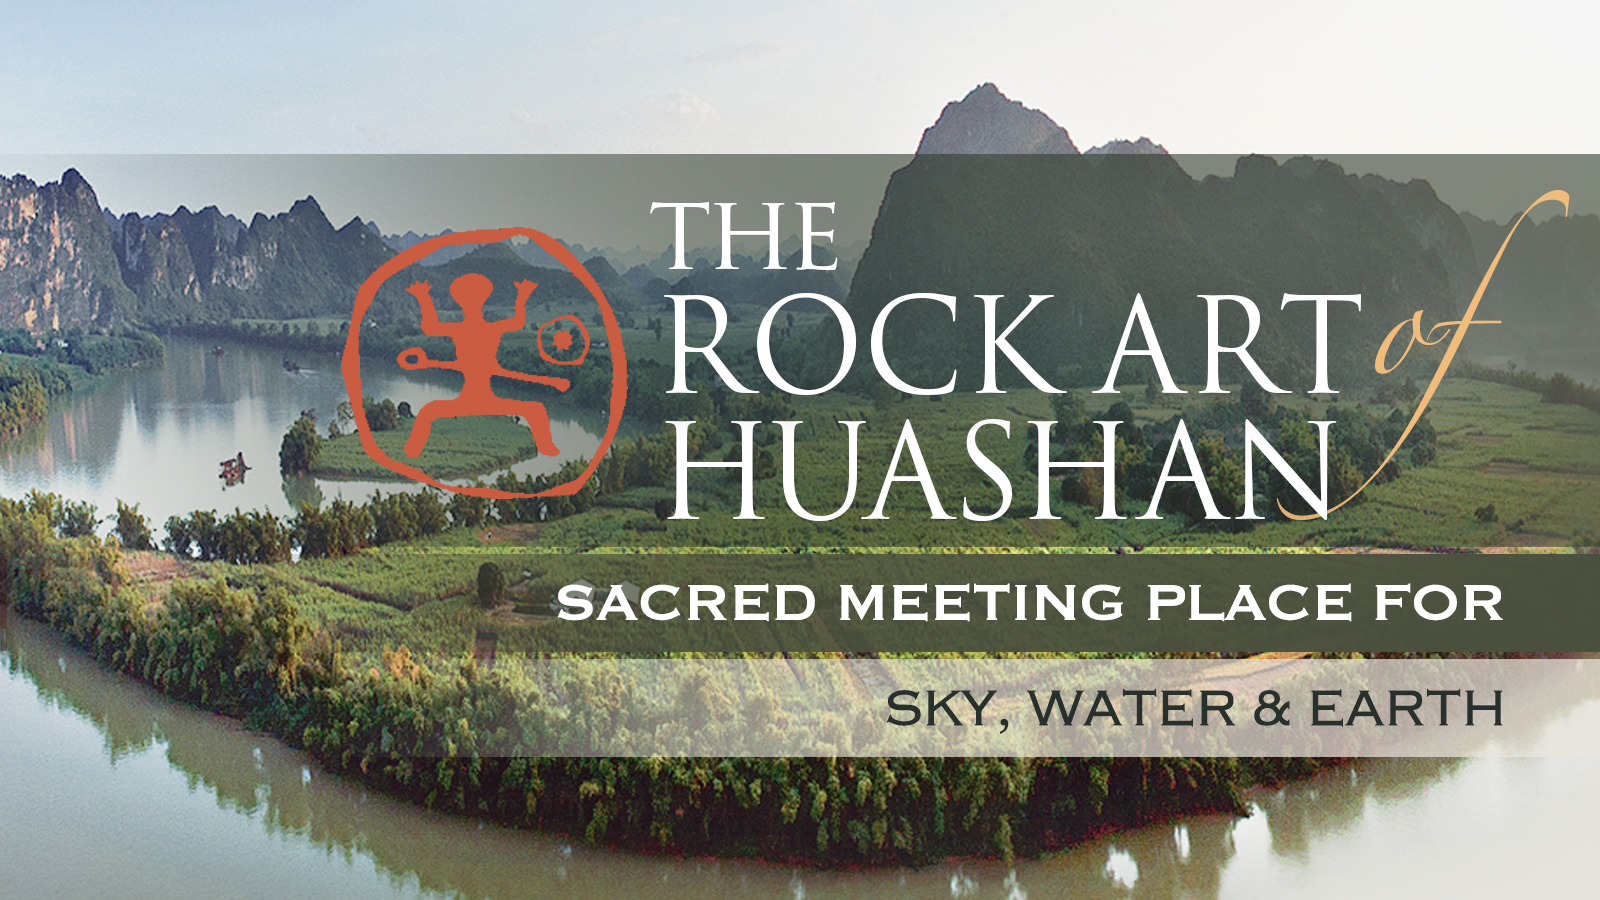 Zuojiang Huashan Rock Art Site China Archaeology Sacred Meeting Place for Sky, Water & Earth